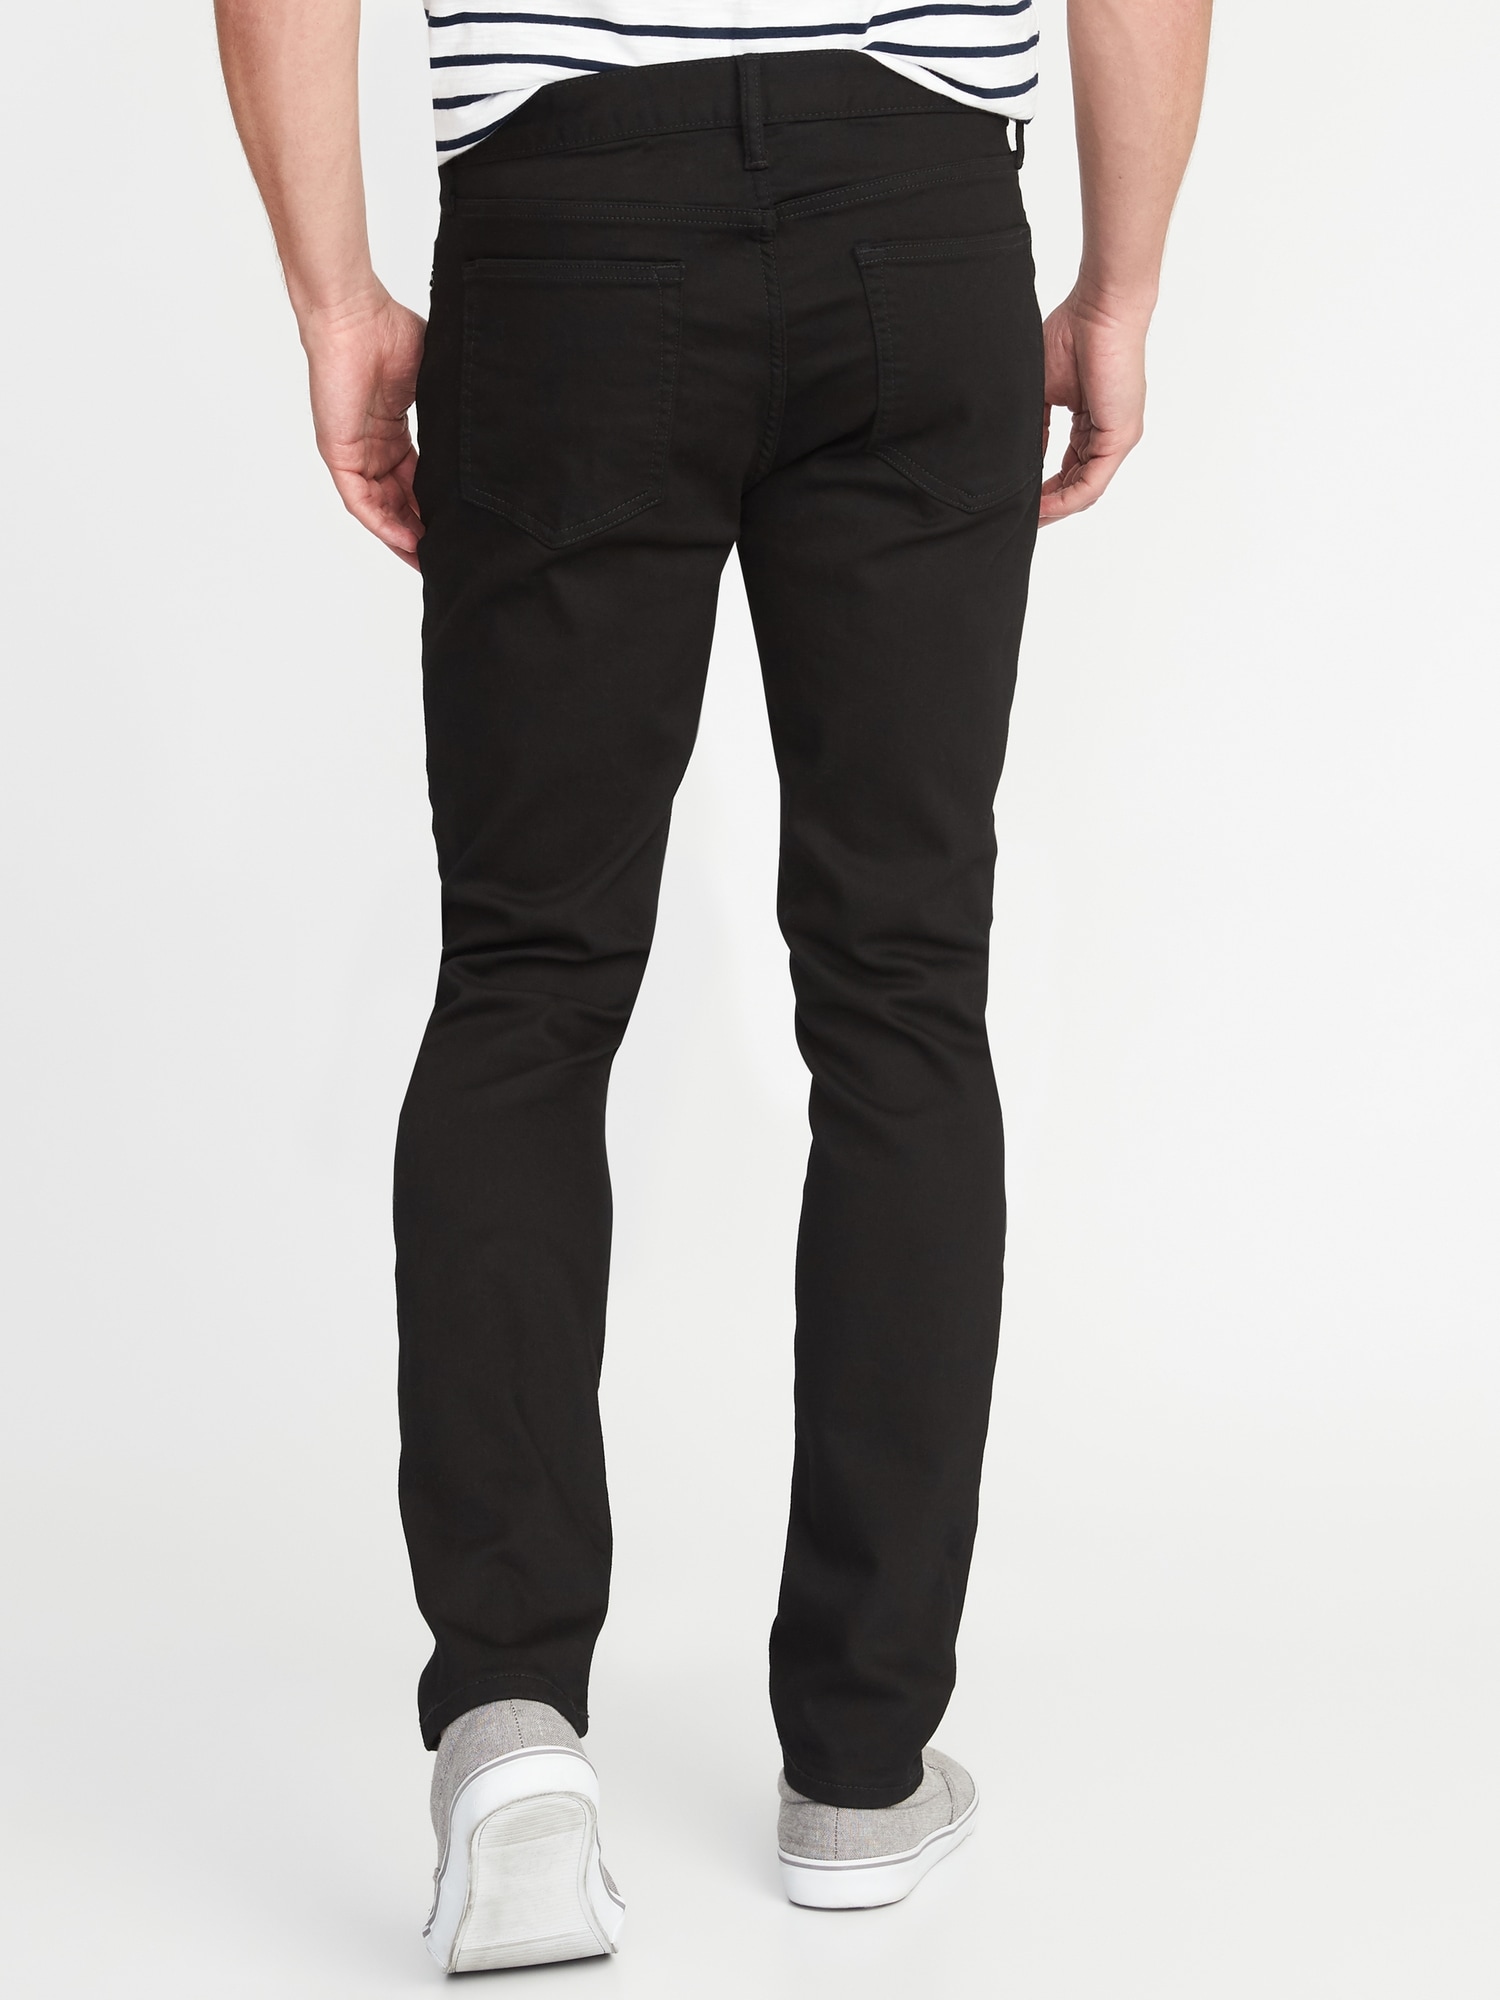 old navy no fade black jeans